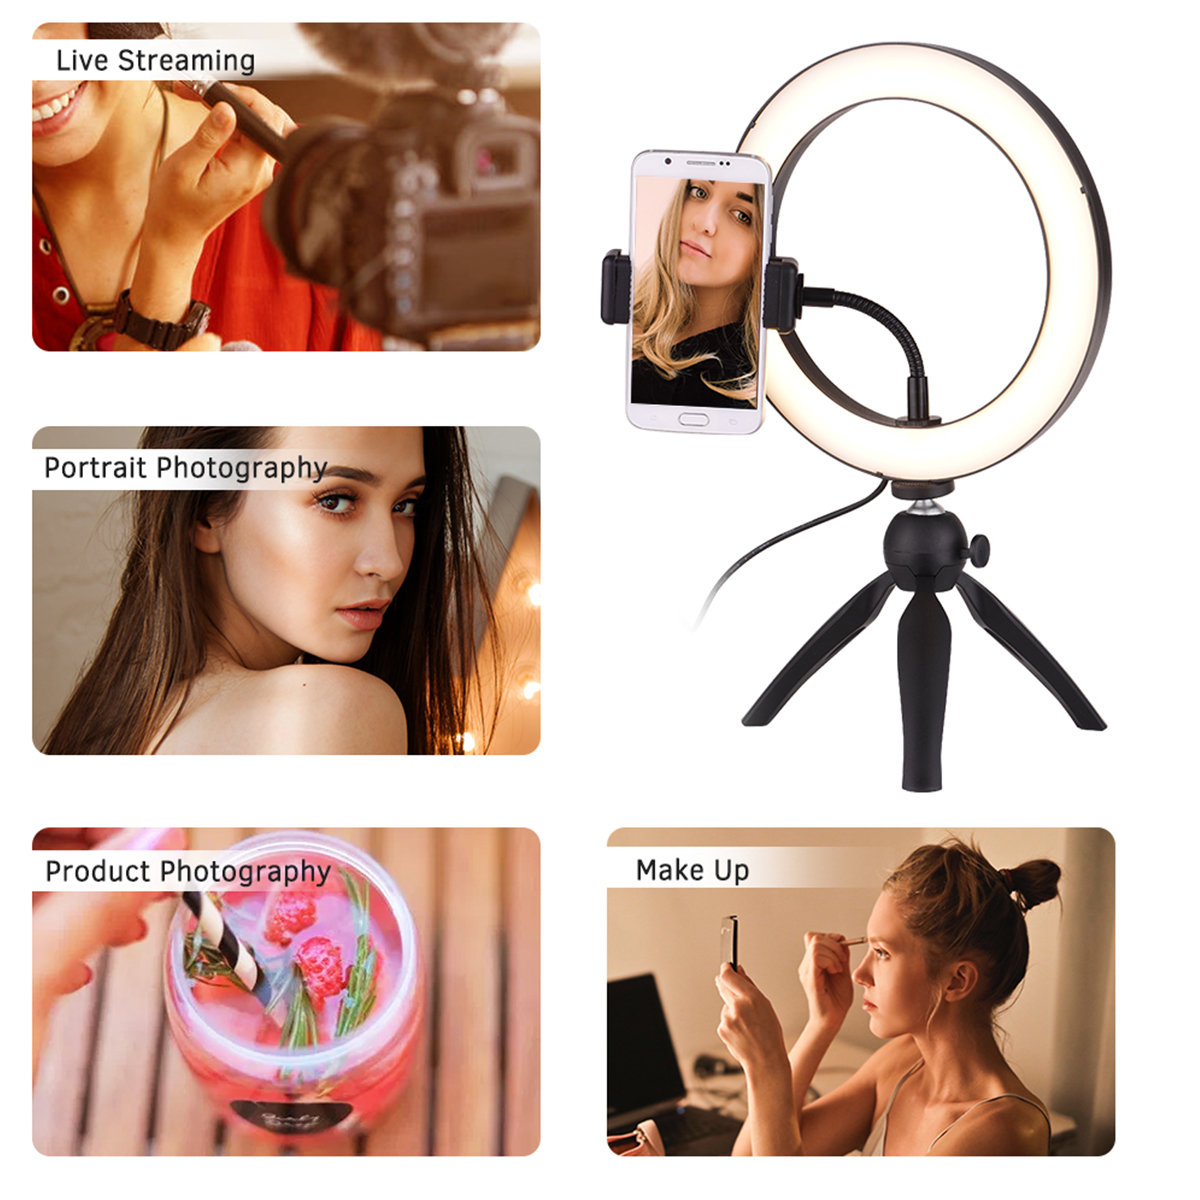 Ring-Light-LED-Makeup-Ring-Lamp-USB-Portable-Selfie-Ring-Lamp-Phone-Holder-Tripod-Stand-Photography--1579907-2